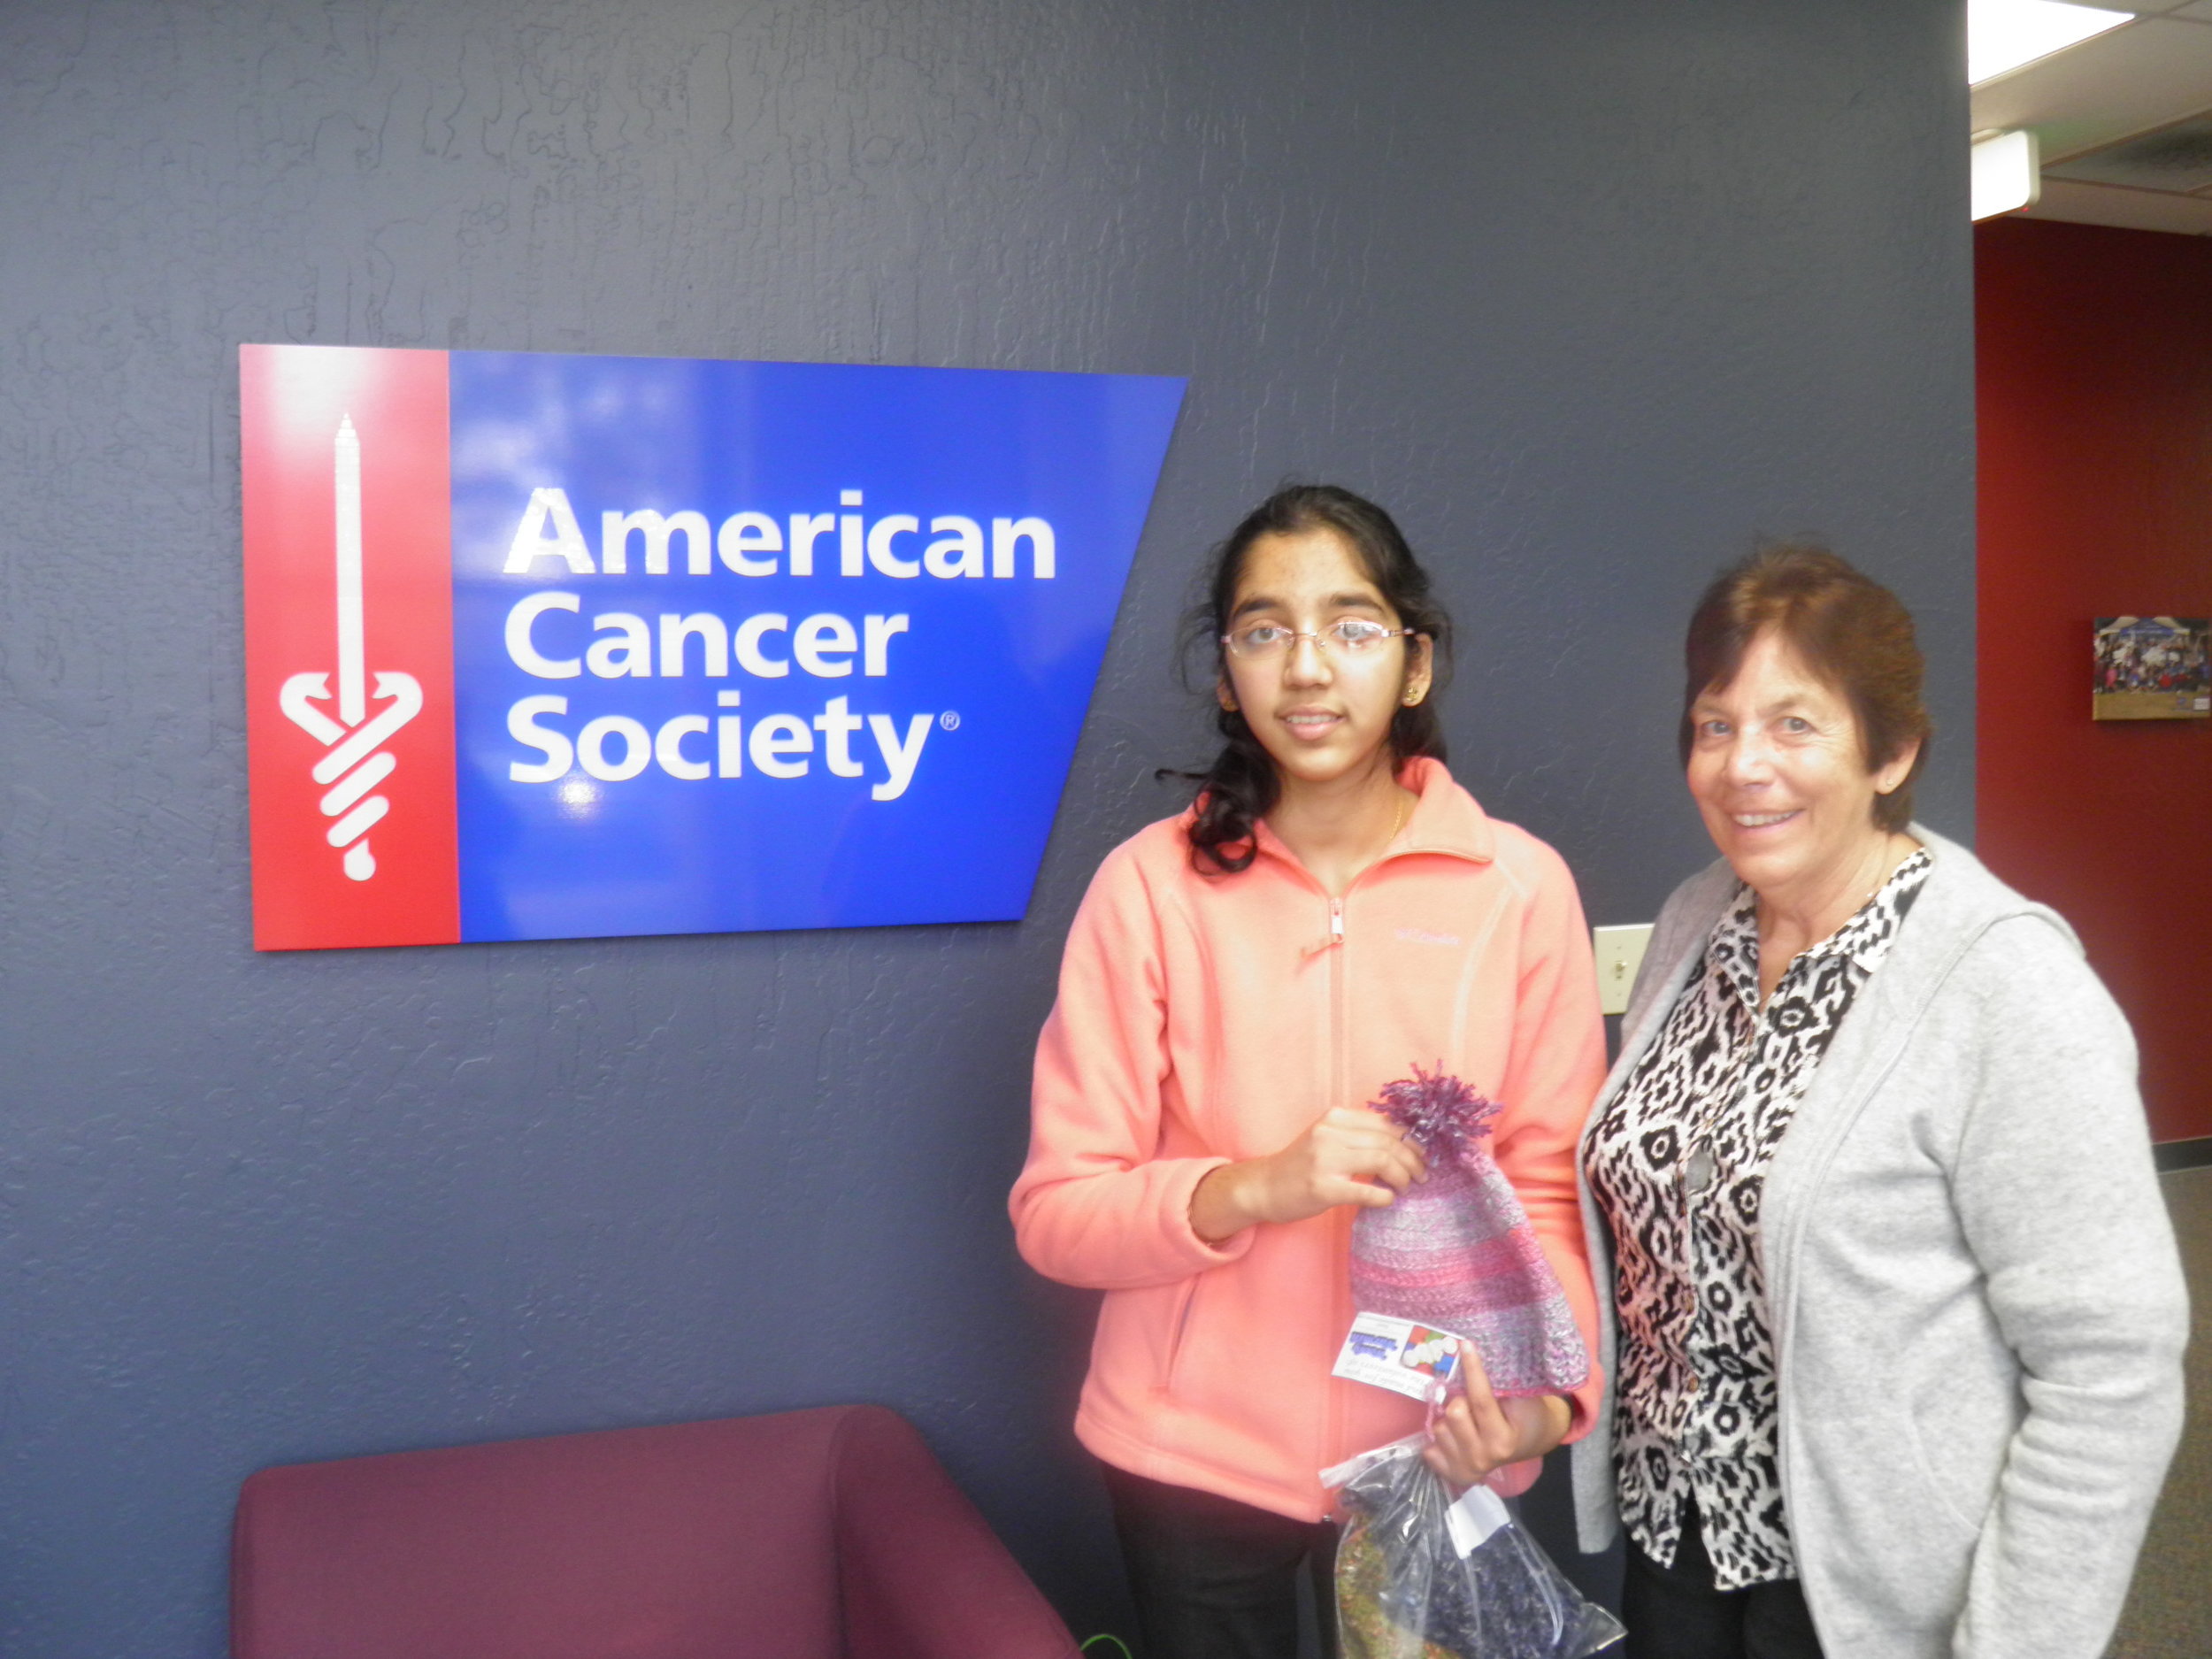 With Ms. Kathy Milano, American Cancer Society